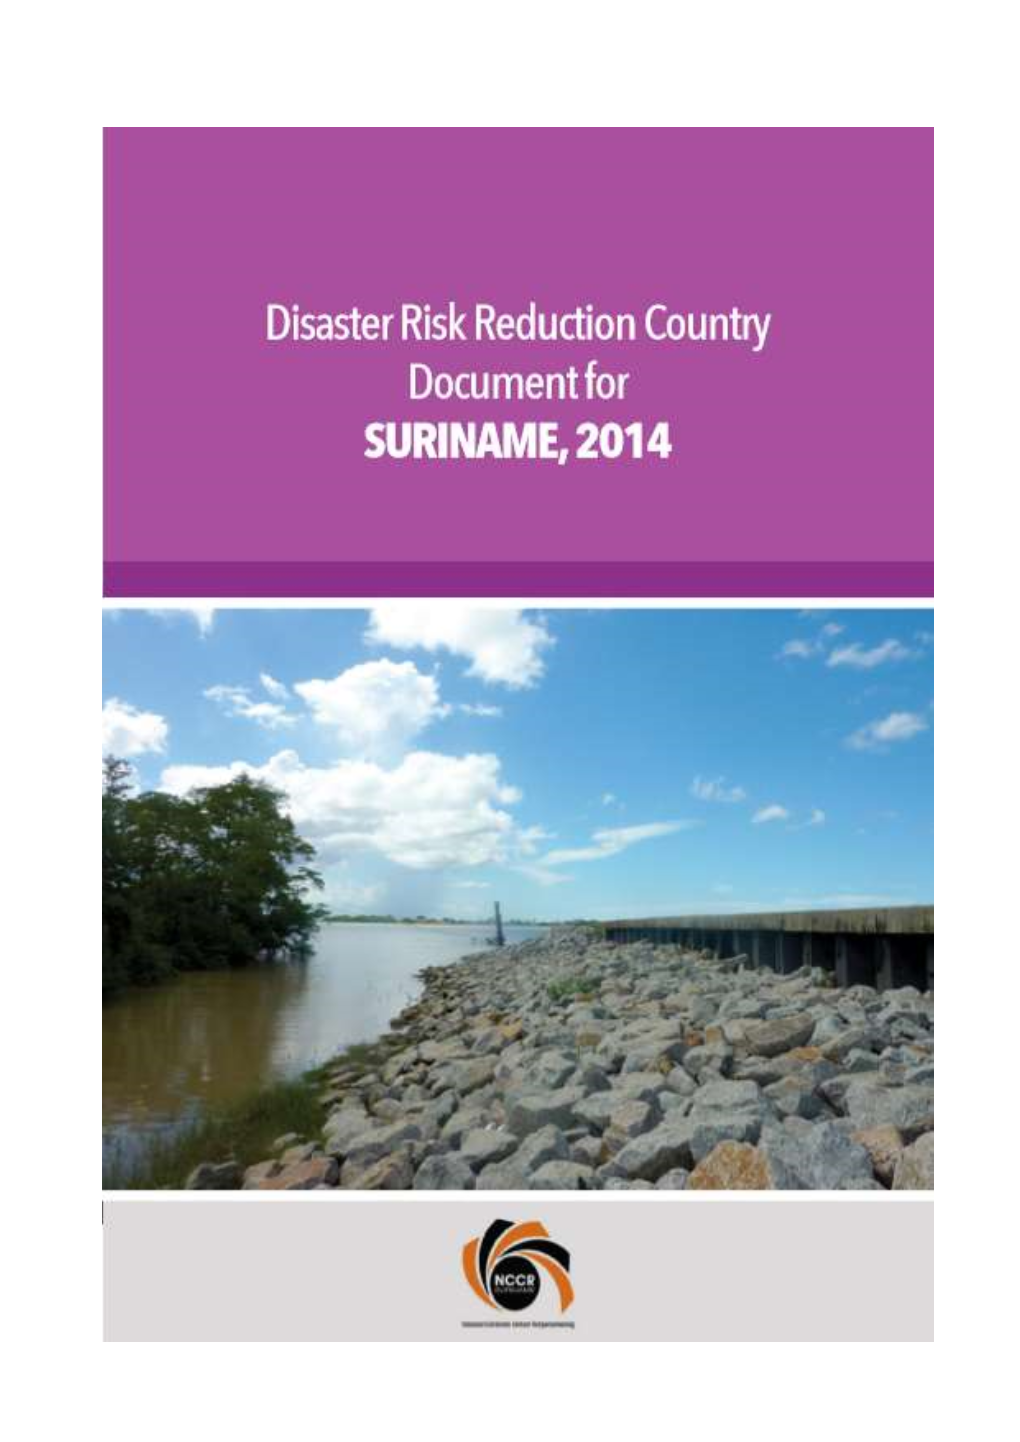 Disaster Risk Reduction Country Document for Suriname, 2014 February 2017 National Coordination Center for Disaster Relief (NCCR)